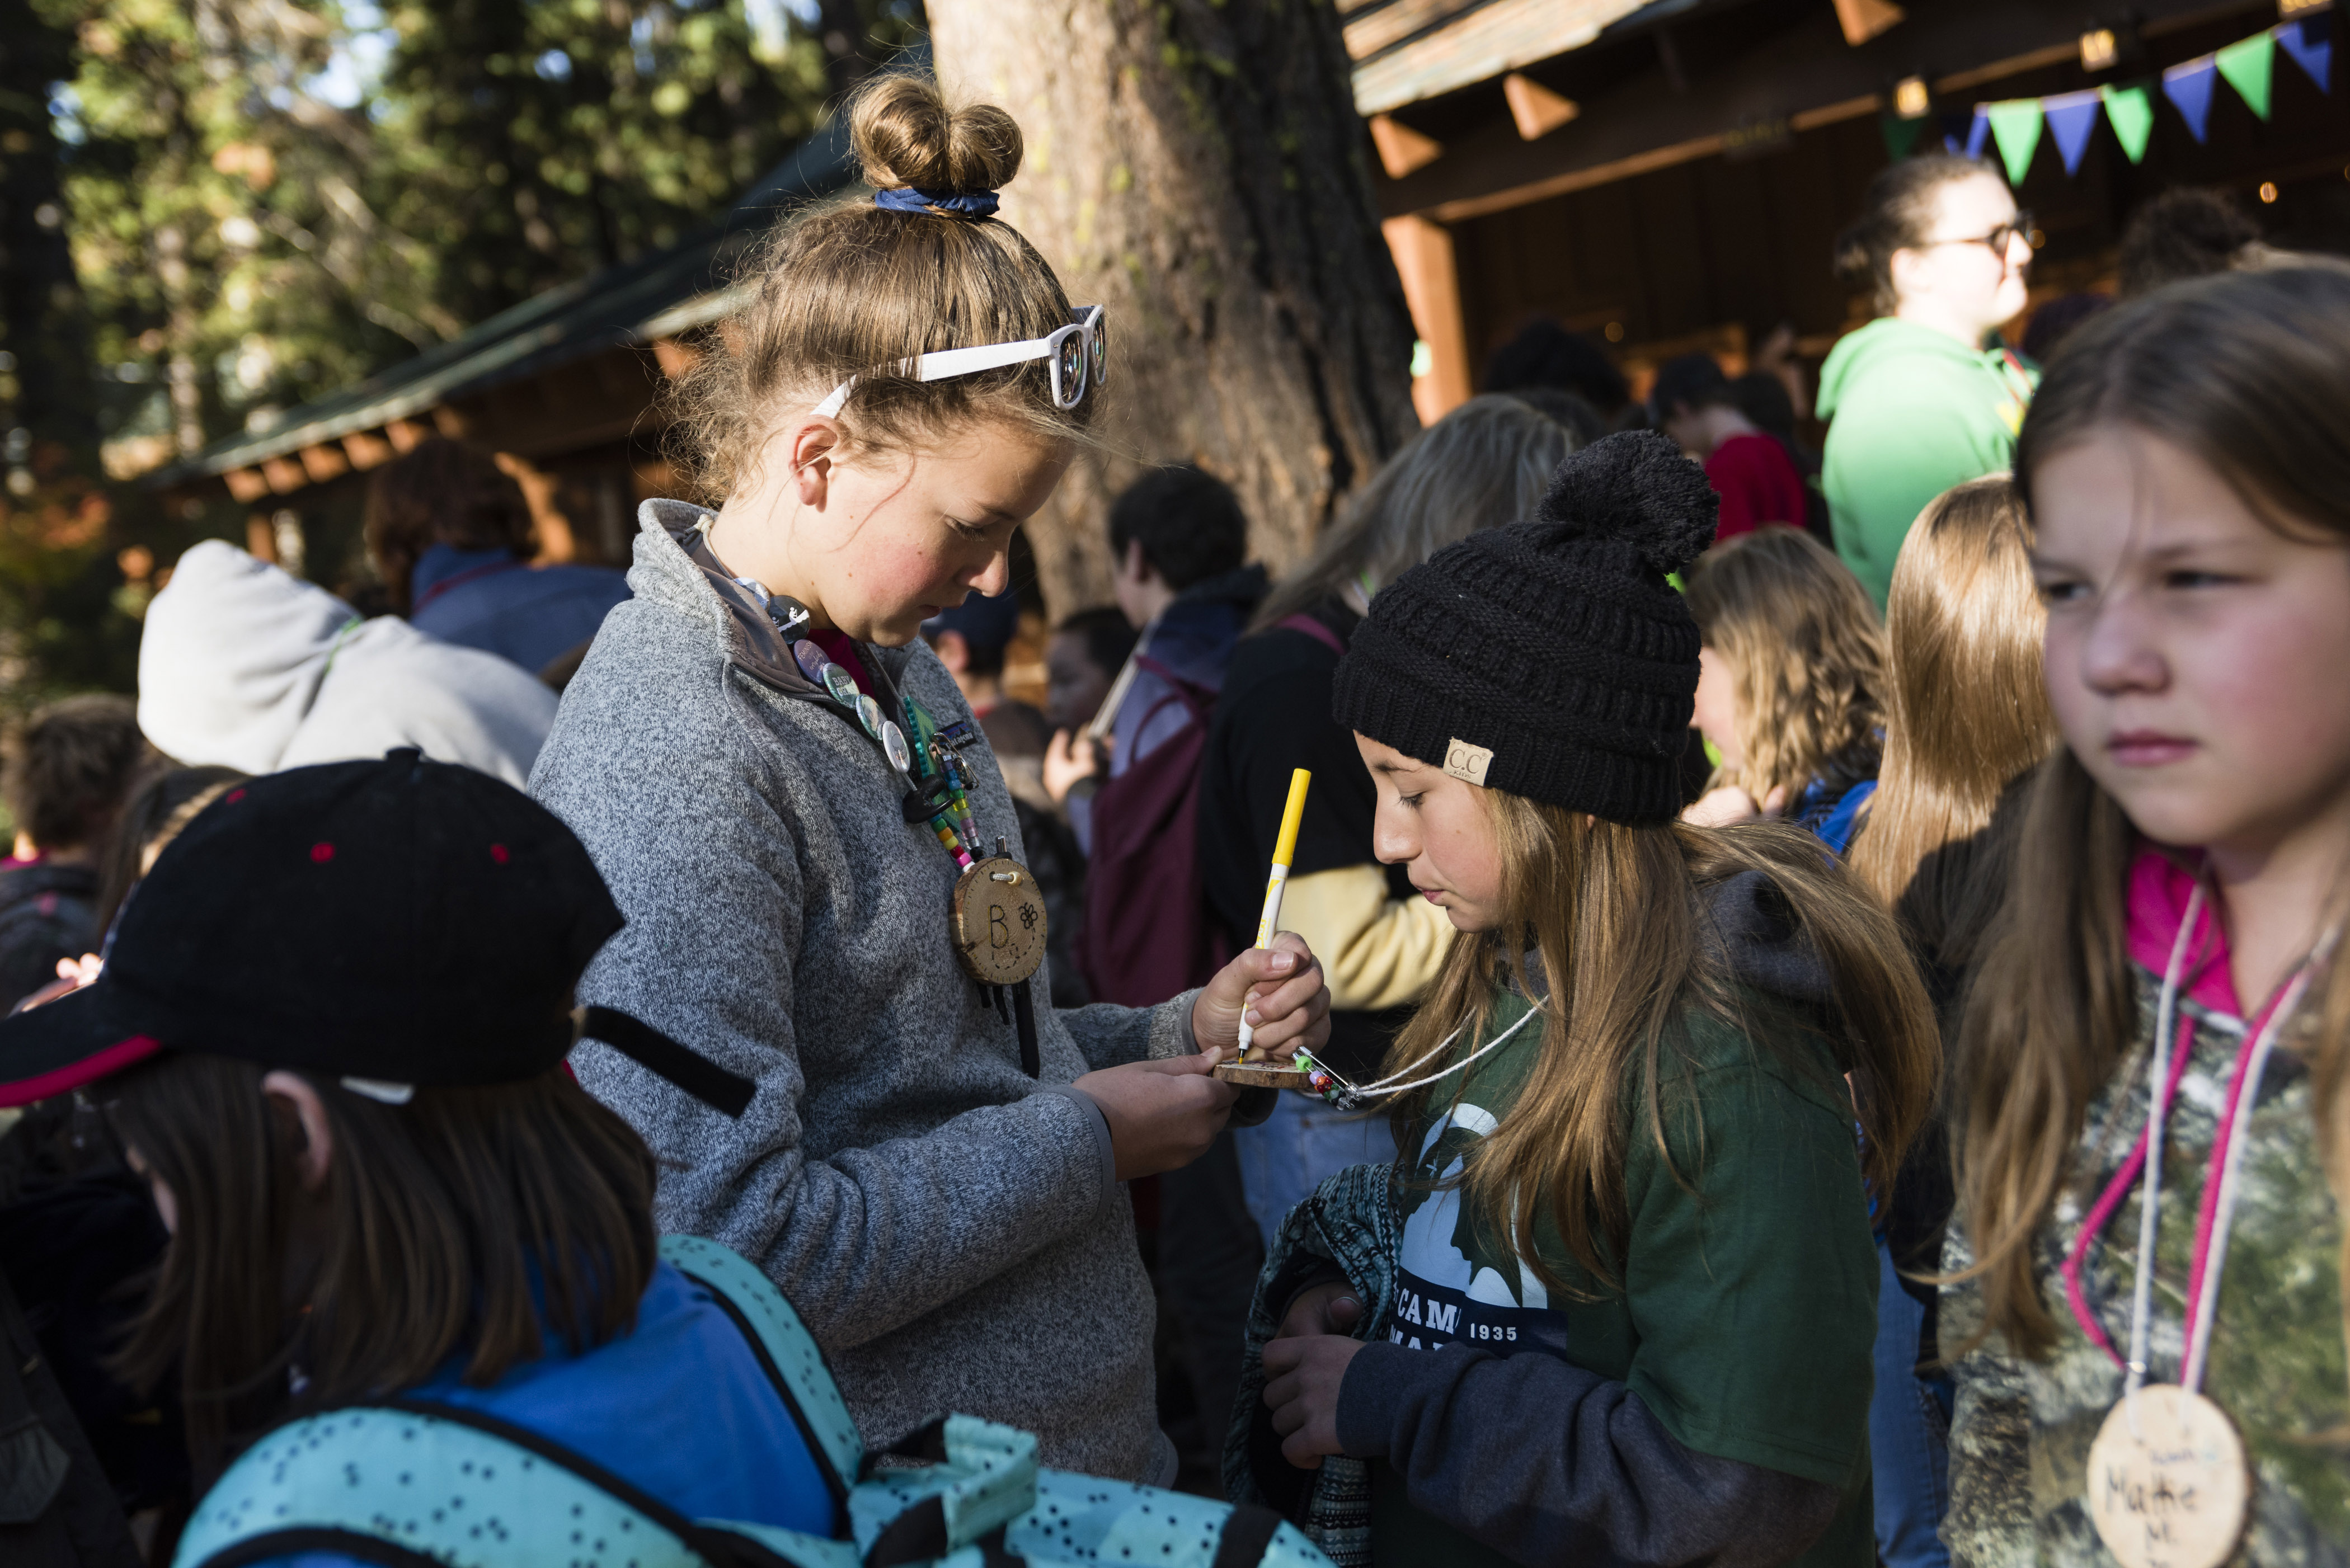 Girl writing on another girl's necklace within a crowd